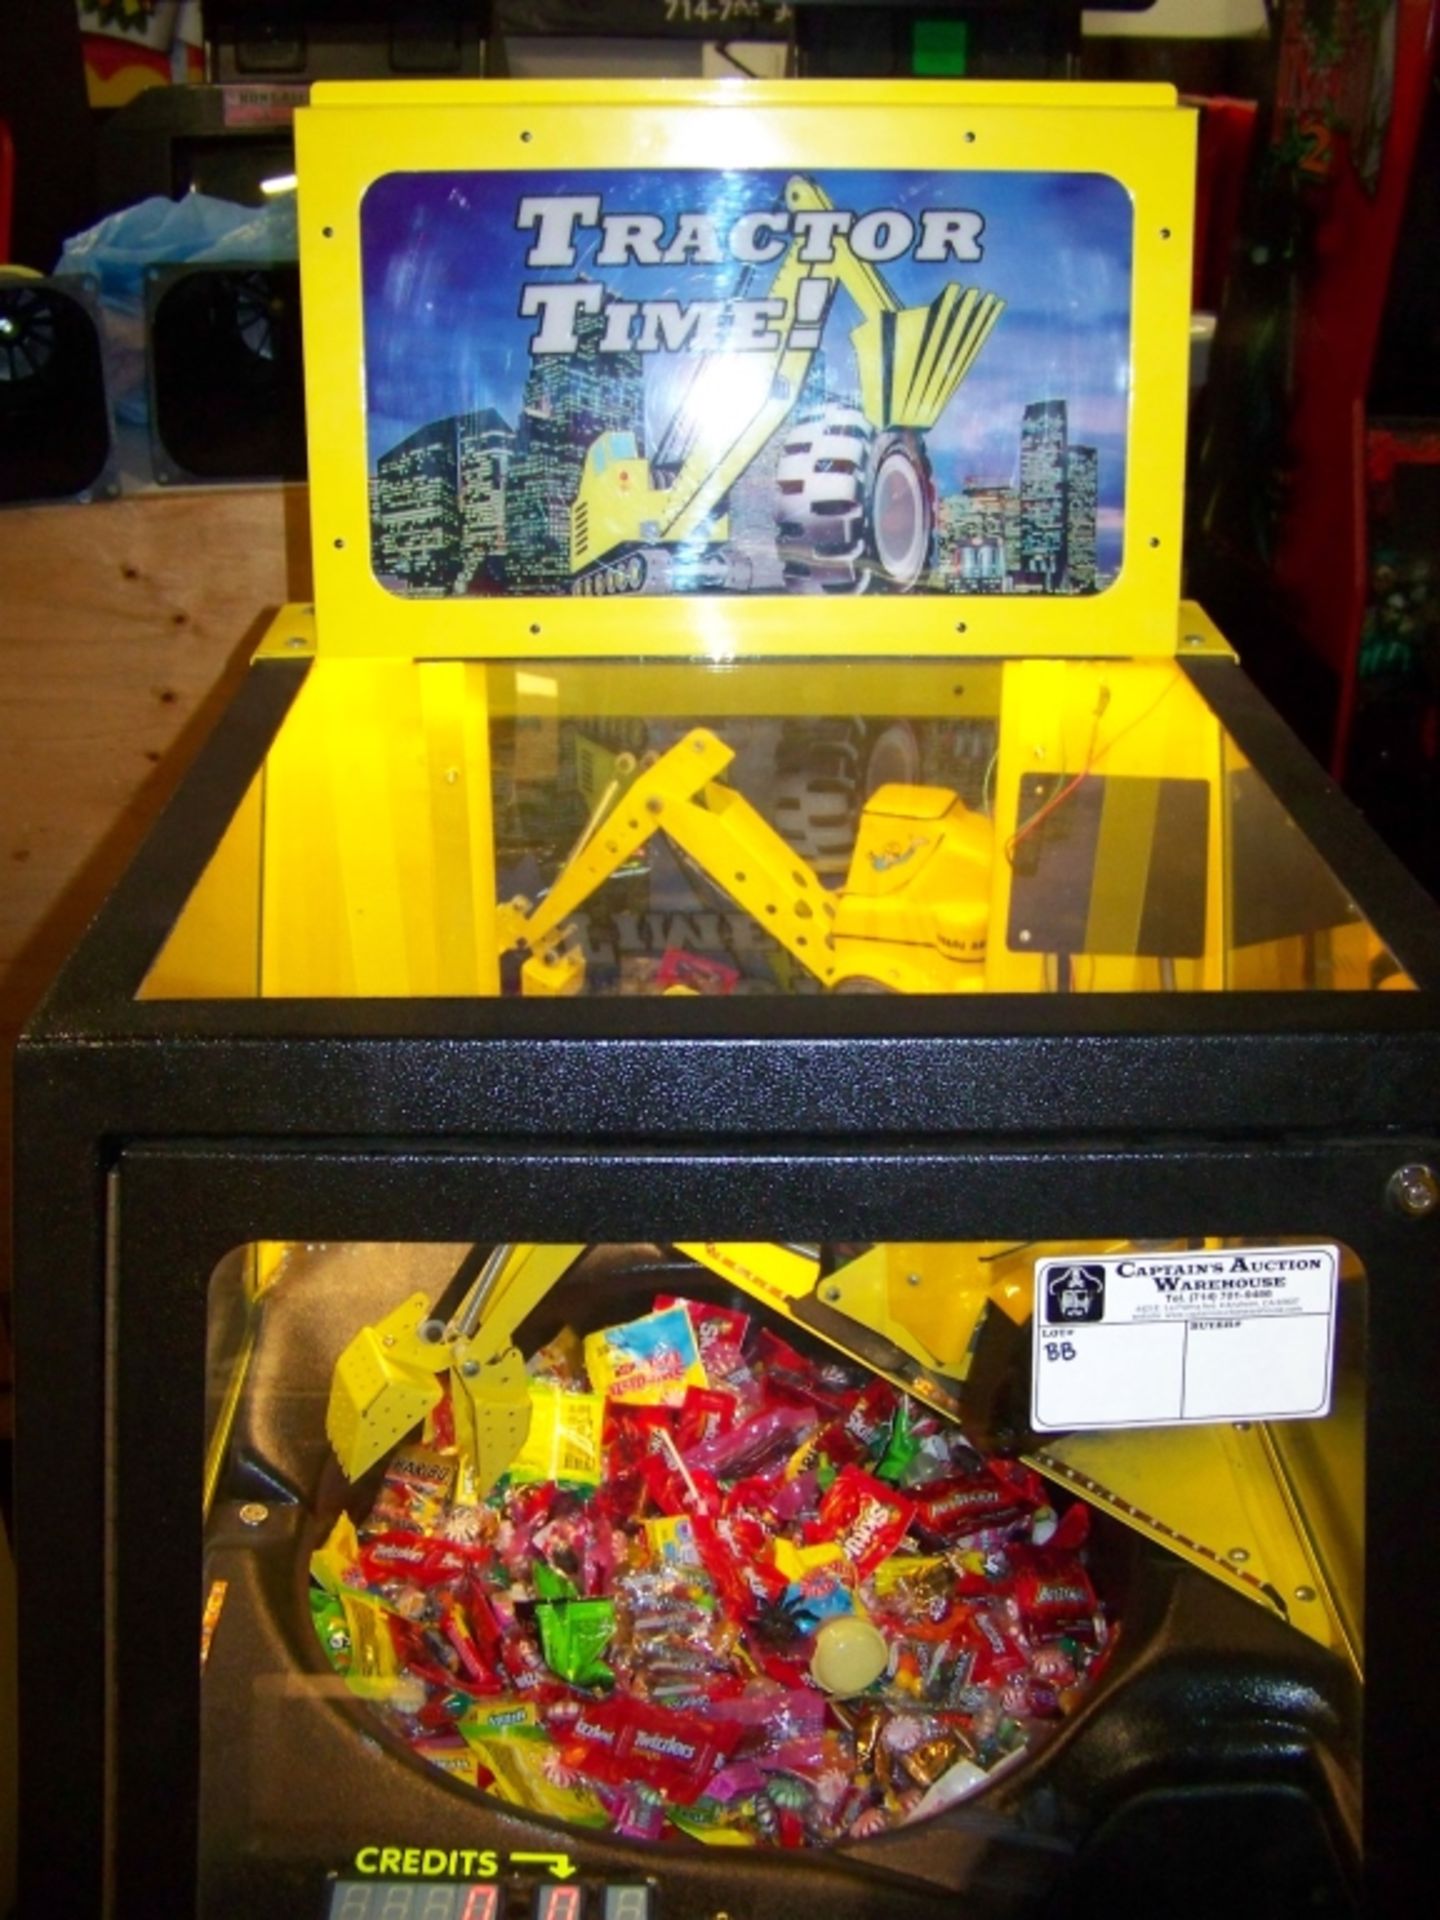 TRACTOR TIME CANDY SHOVEL MERCHANDISER MACHINE - Image 4 of 5